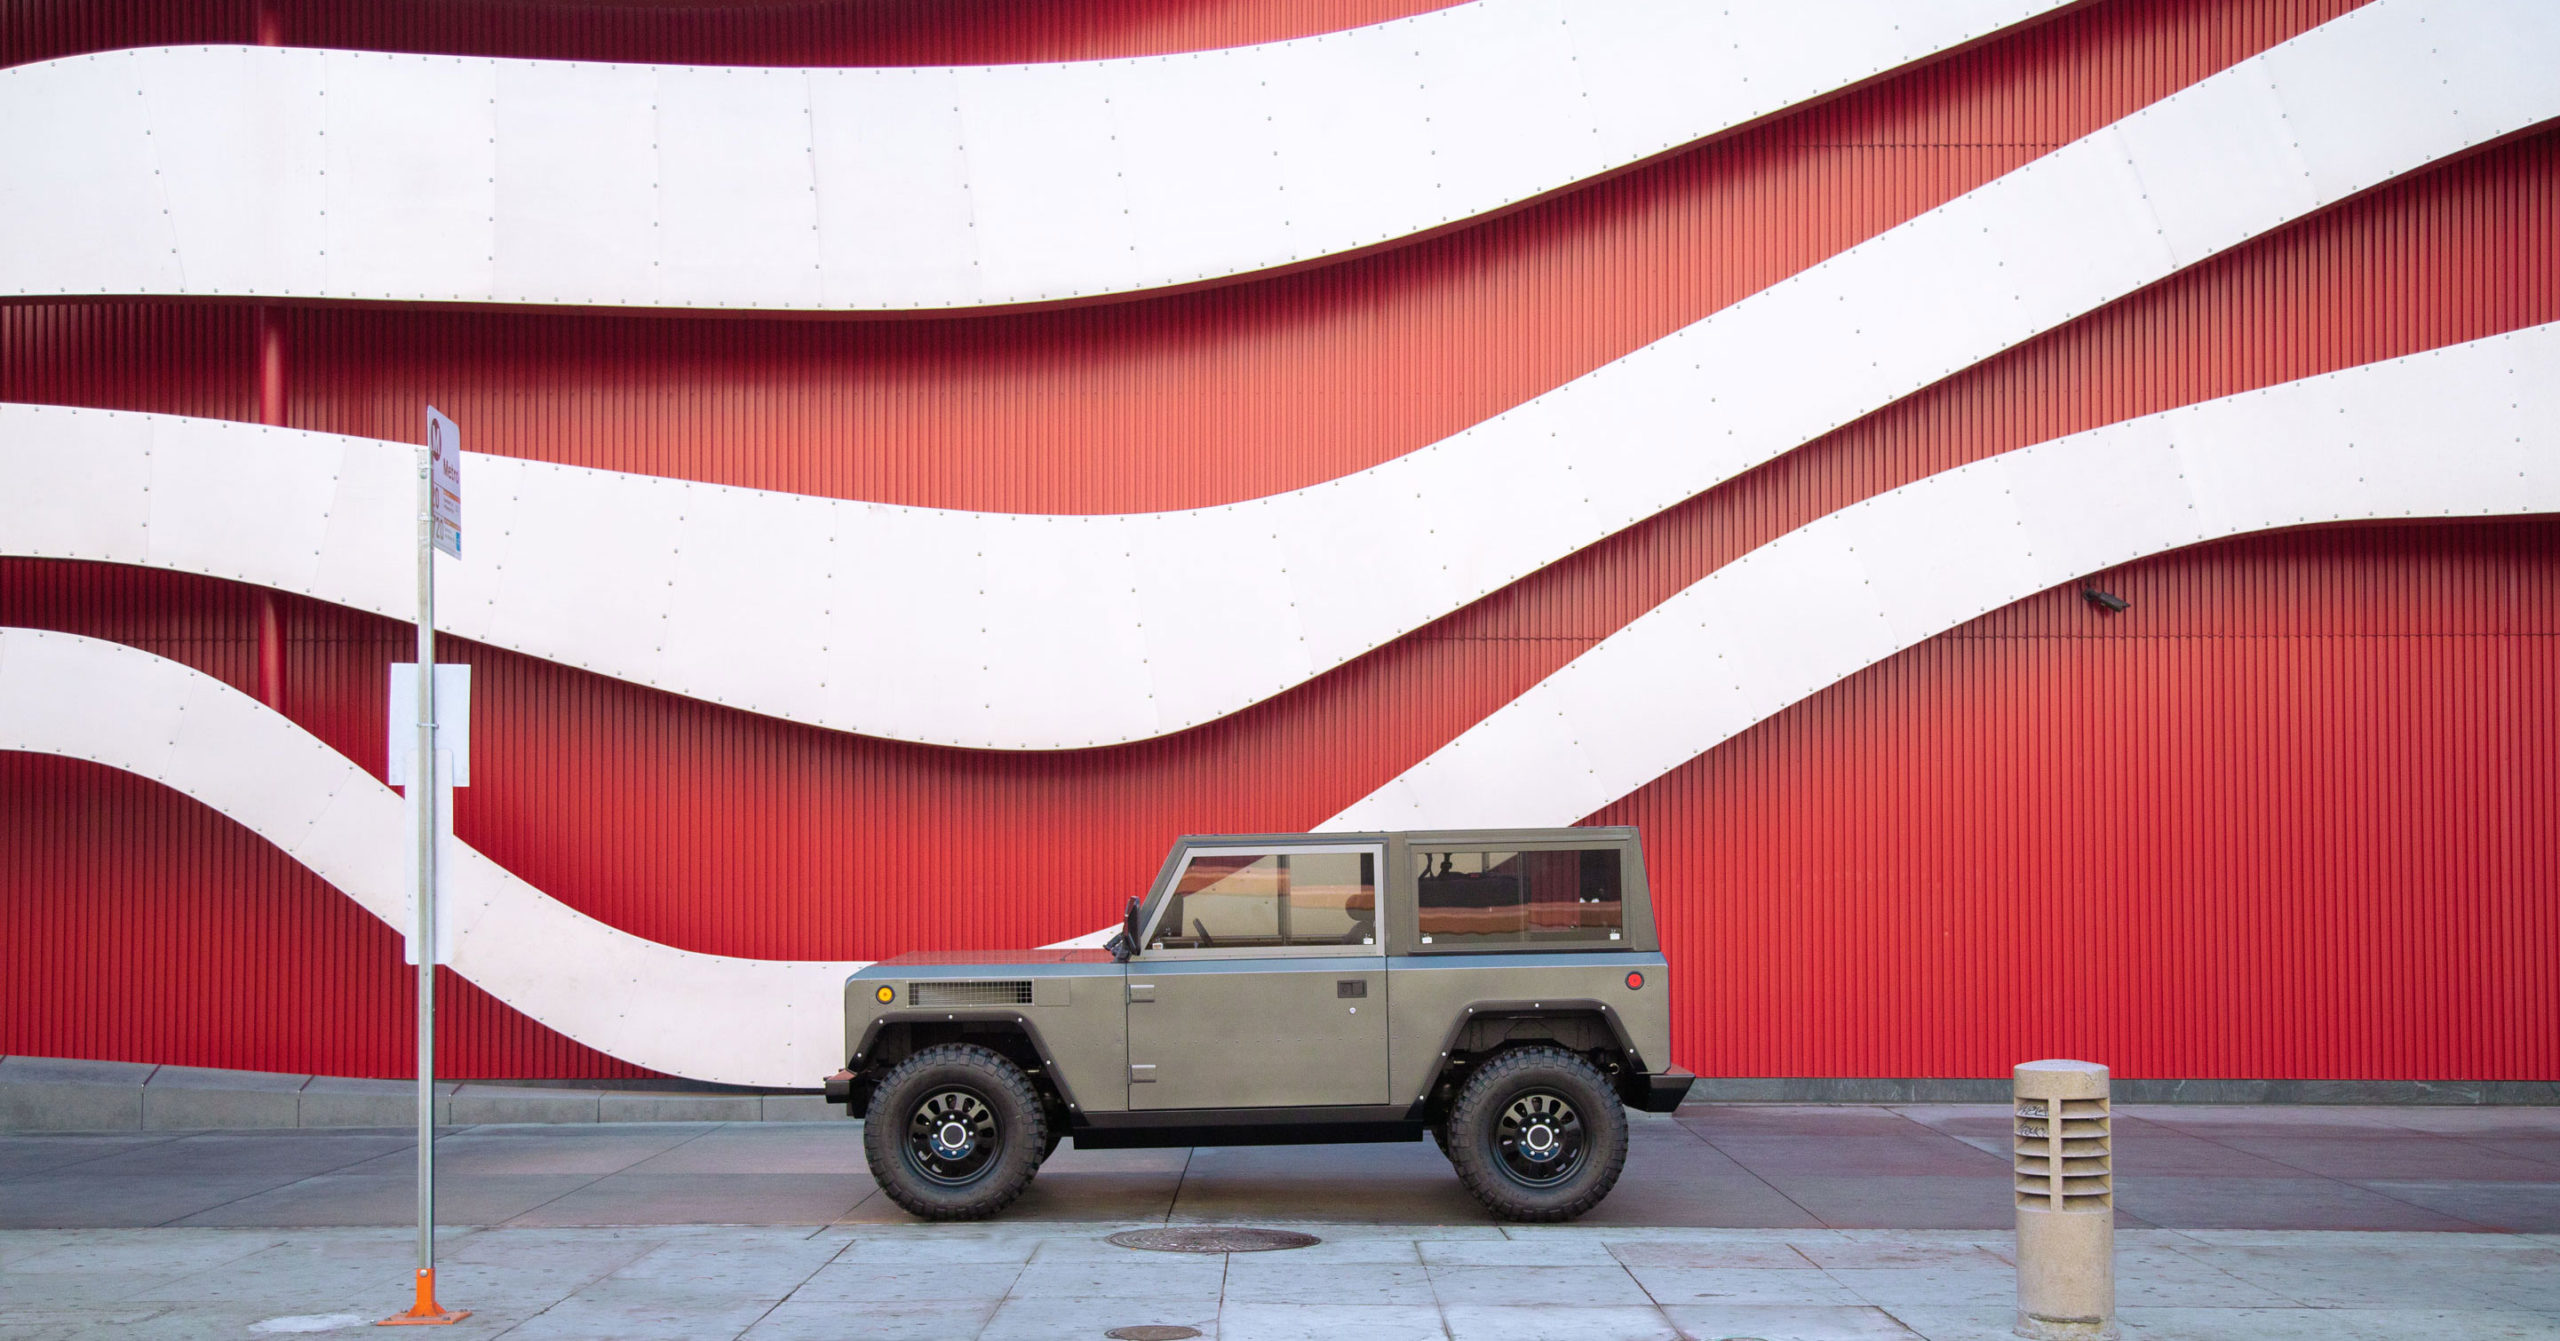 Color photo of the Bollinger B1 Prototype in front of the Petersen Automotive Museum in Los Angeles, California.